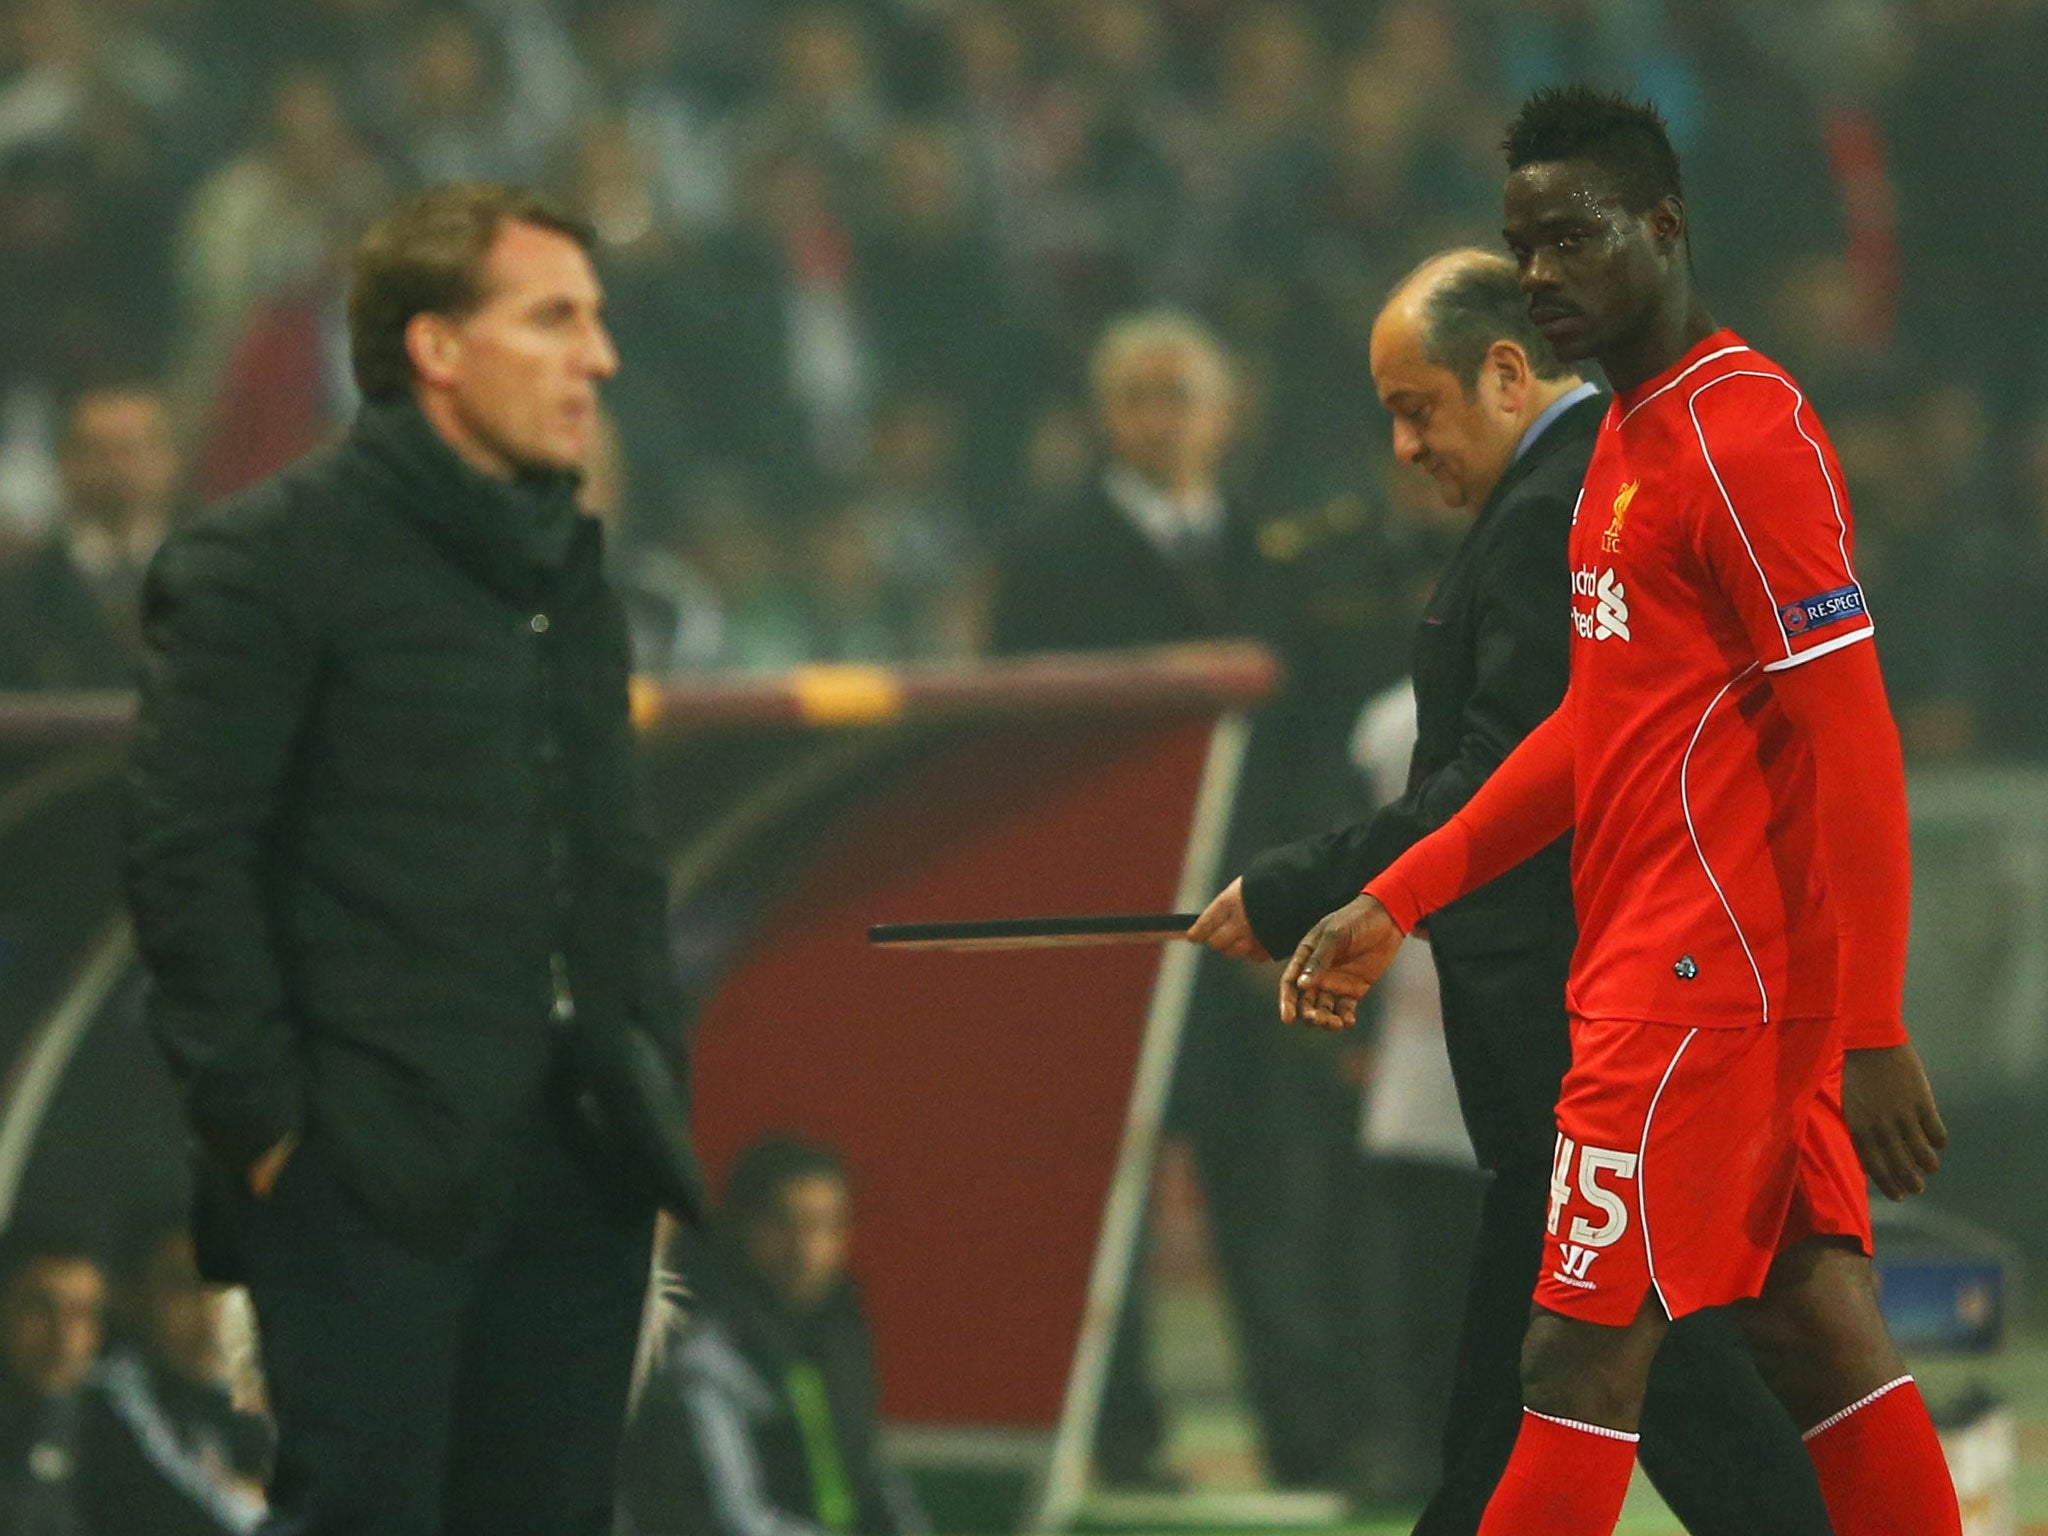 Balotelli glances across to manager Brendan Rodgers as he is subbed last week